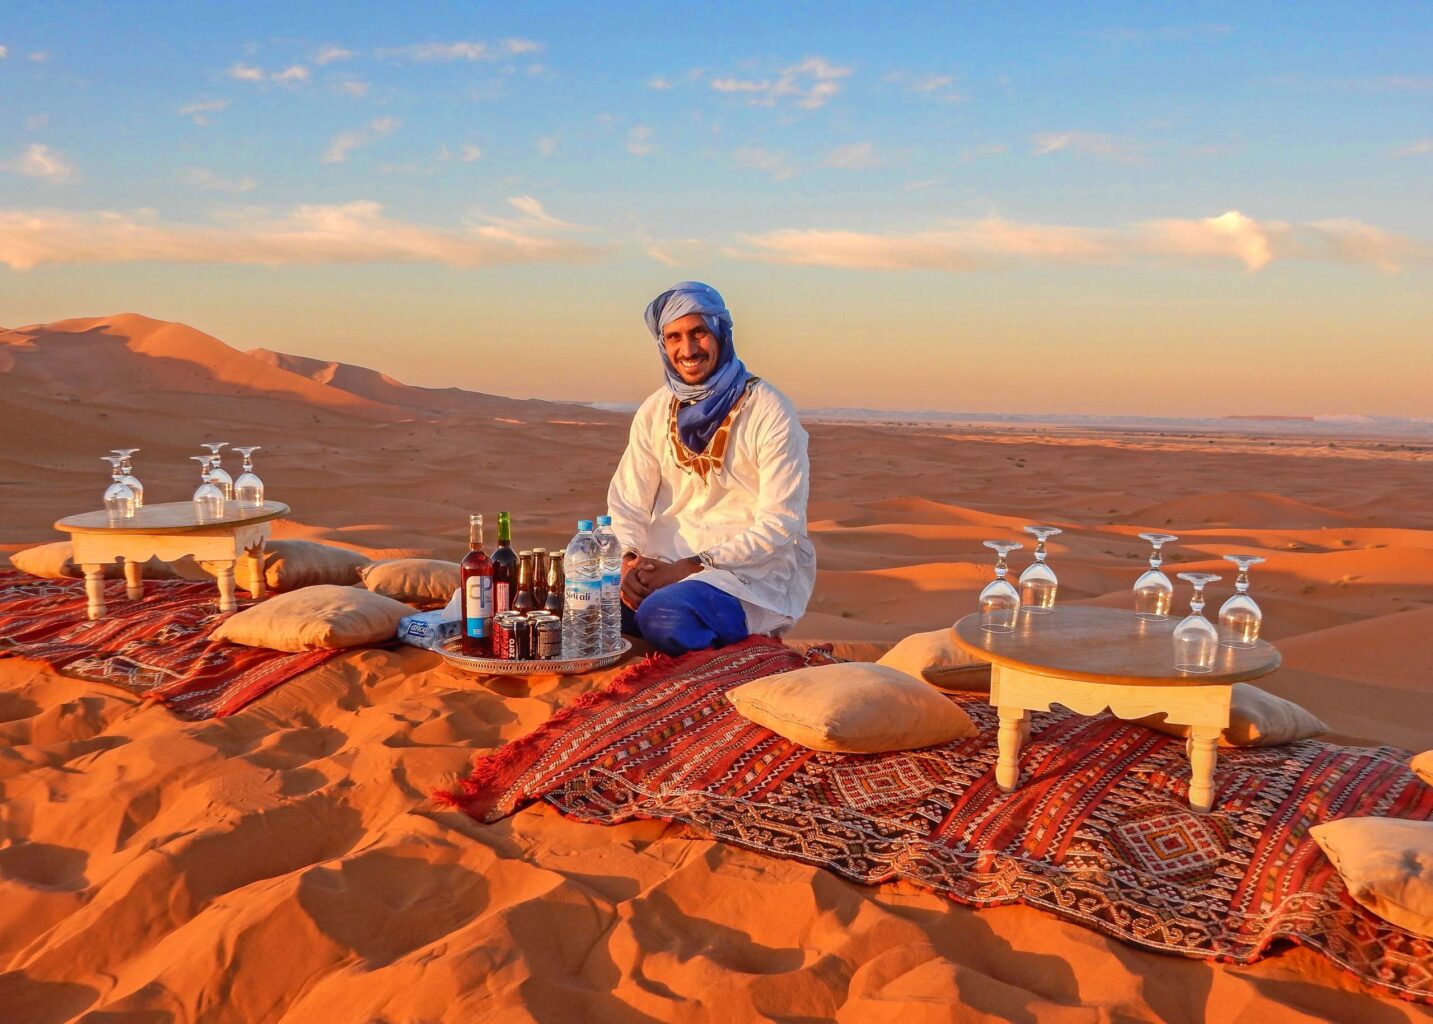 Smiling host in a white robe and blue turban offers refreshing beverages with Sahara Desert dunes in the background.